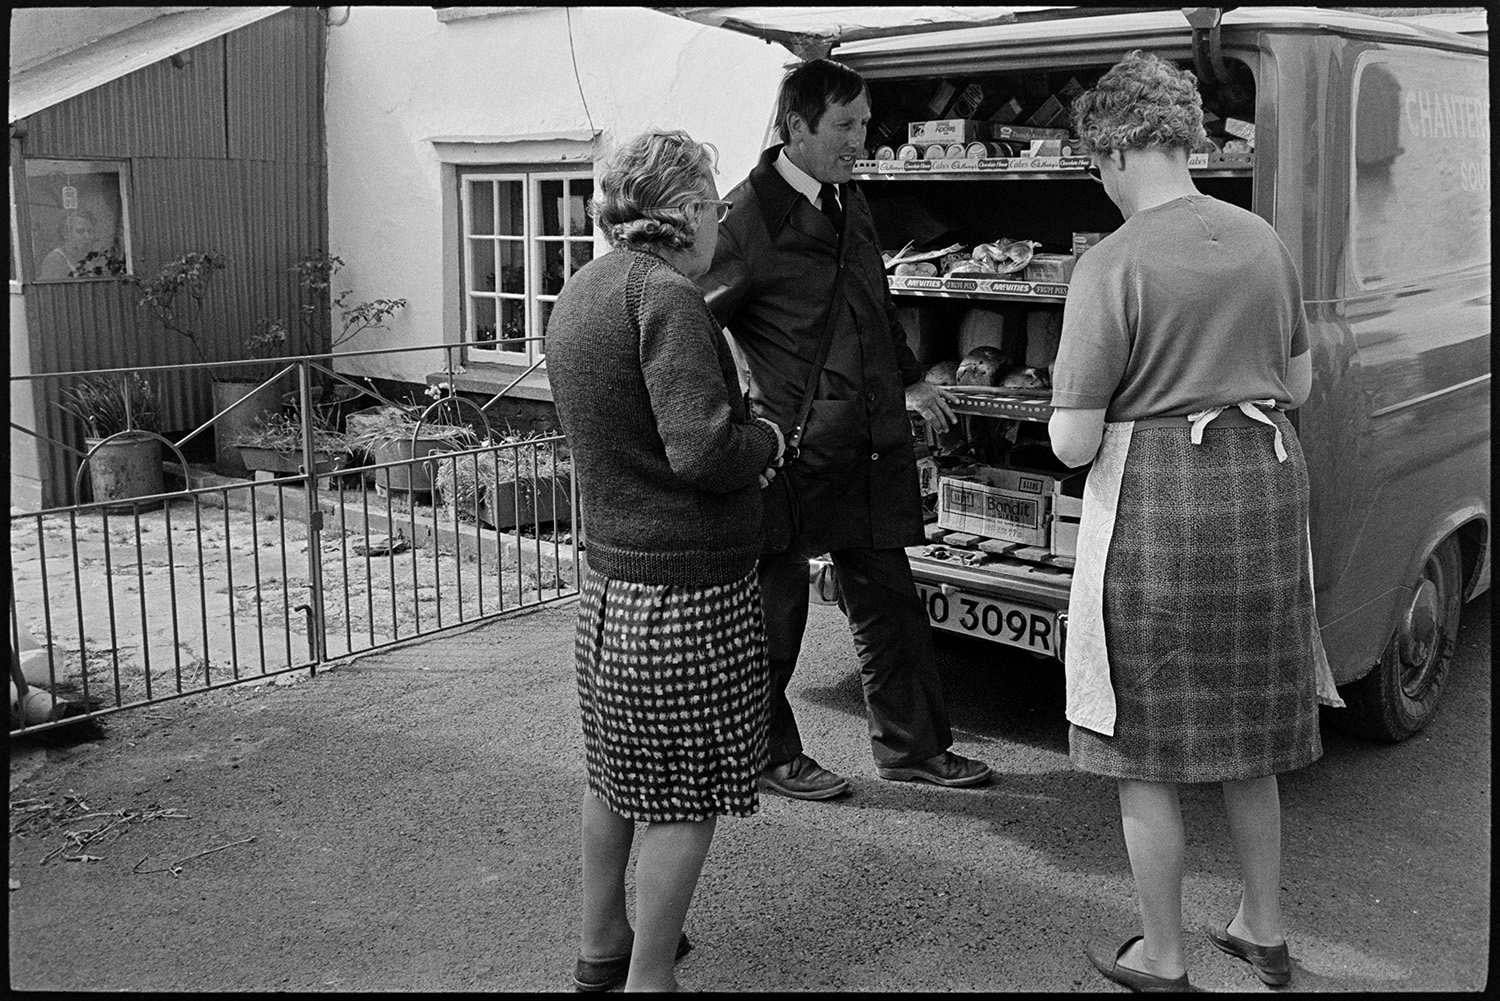 Women buying food from mobile grocers van. <br />
[Miss Audrey Bowden, on the left, and another woman buying groceries from a Grocer's van in a street in Kings Nympton.]